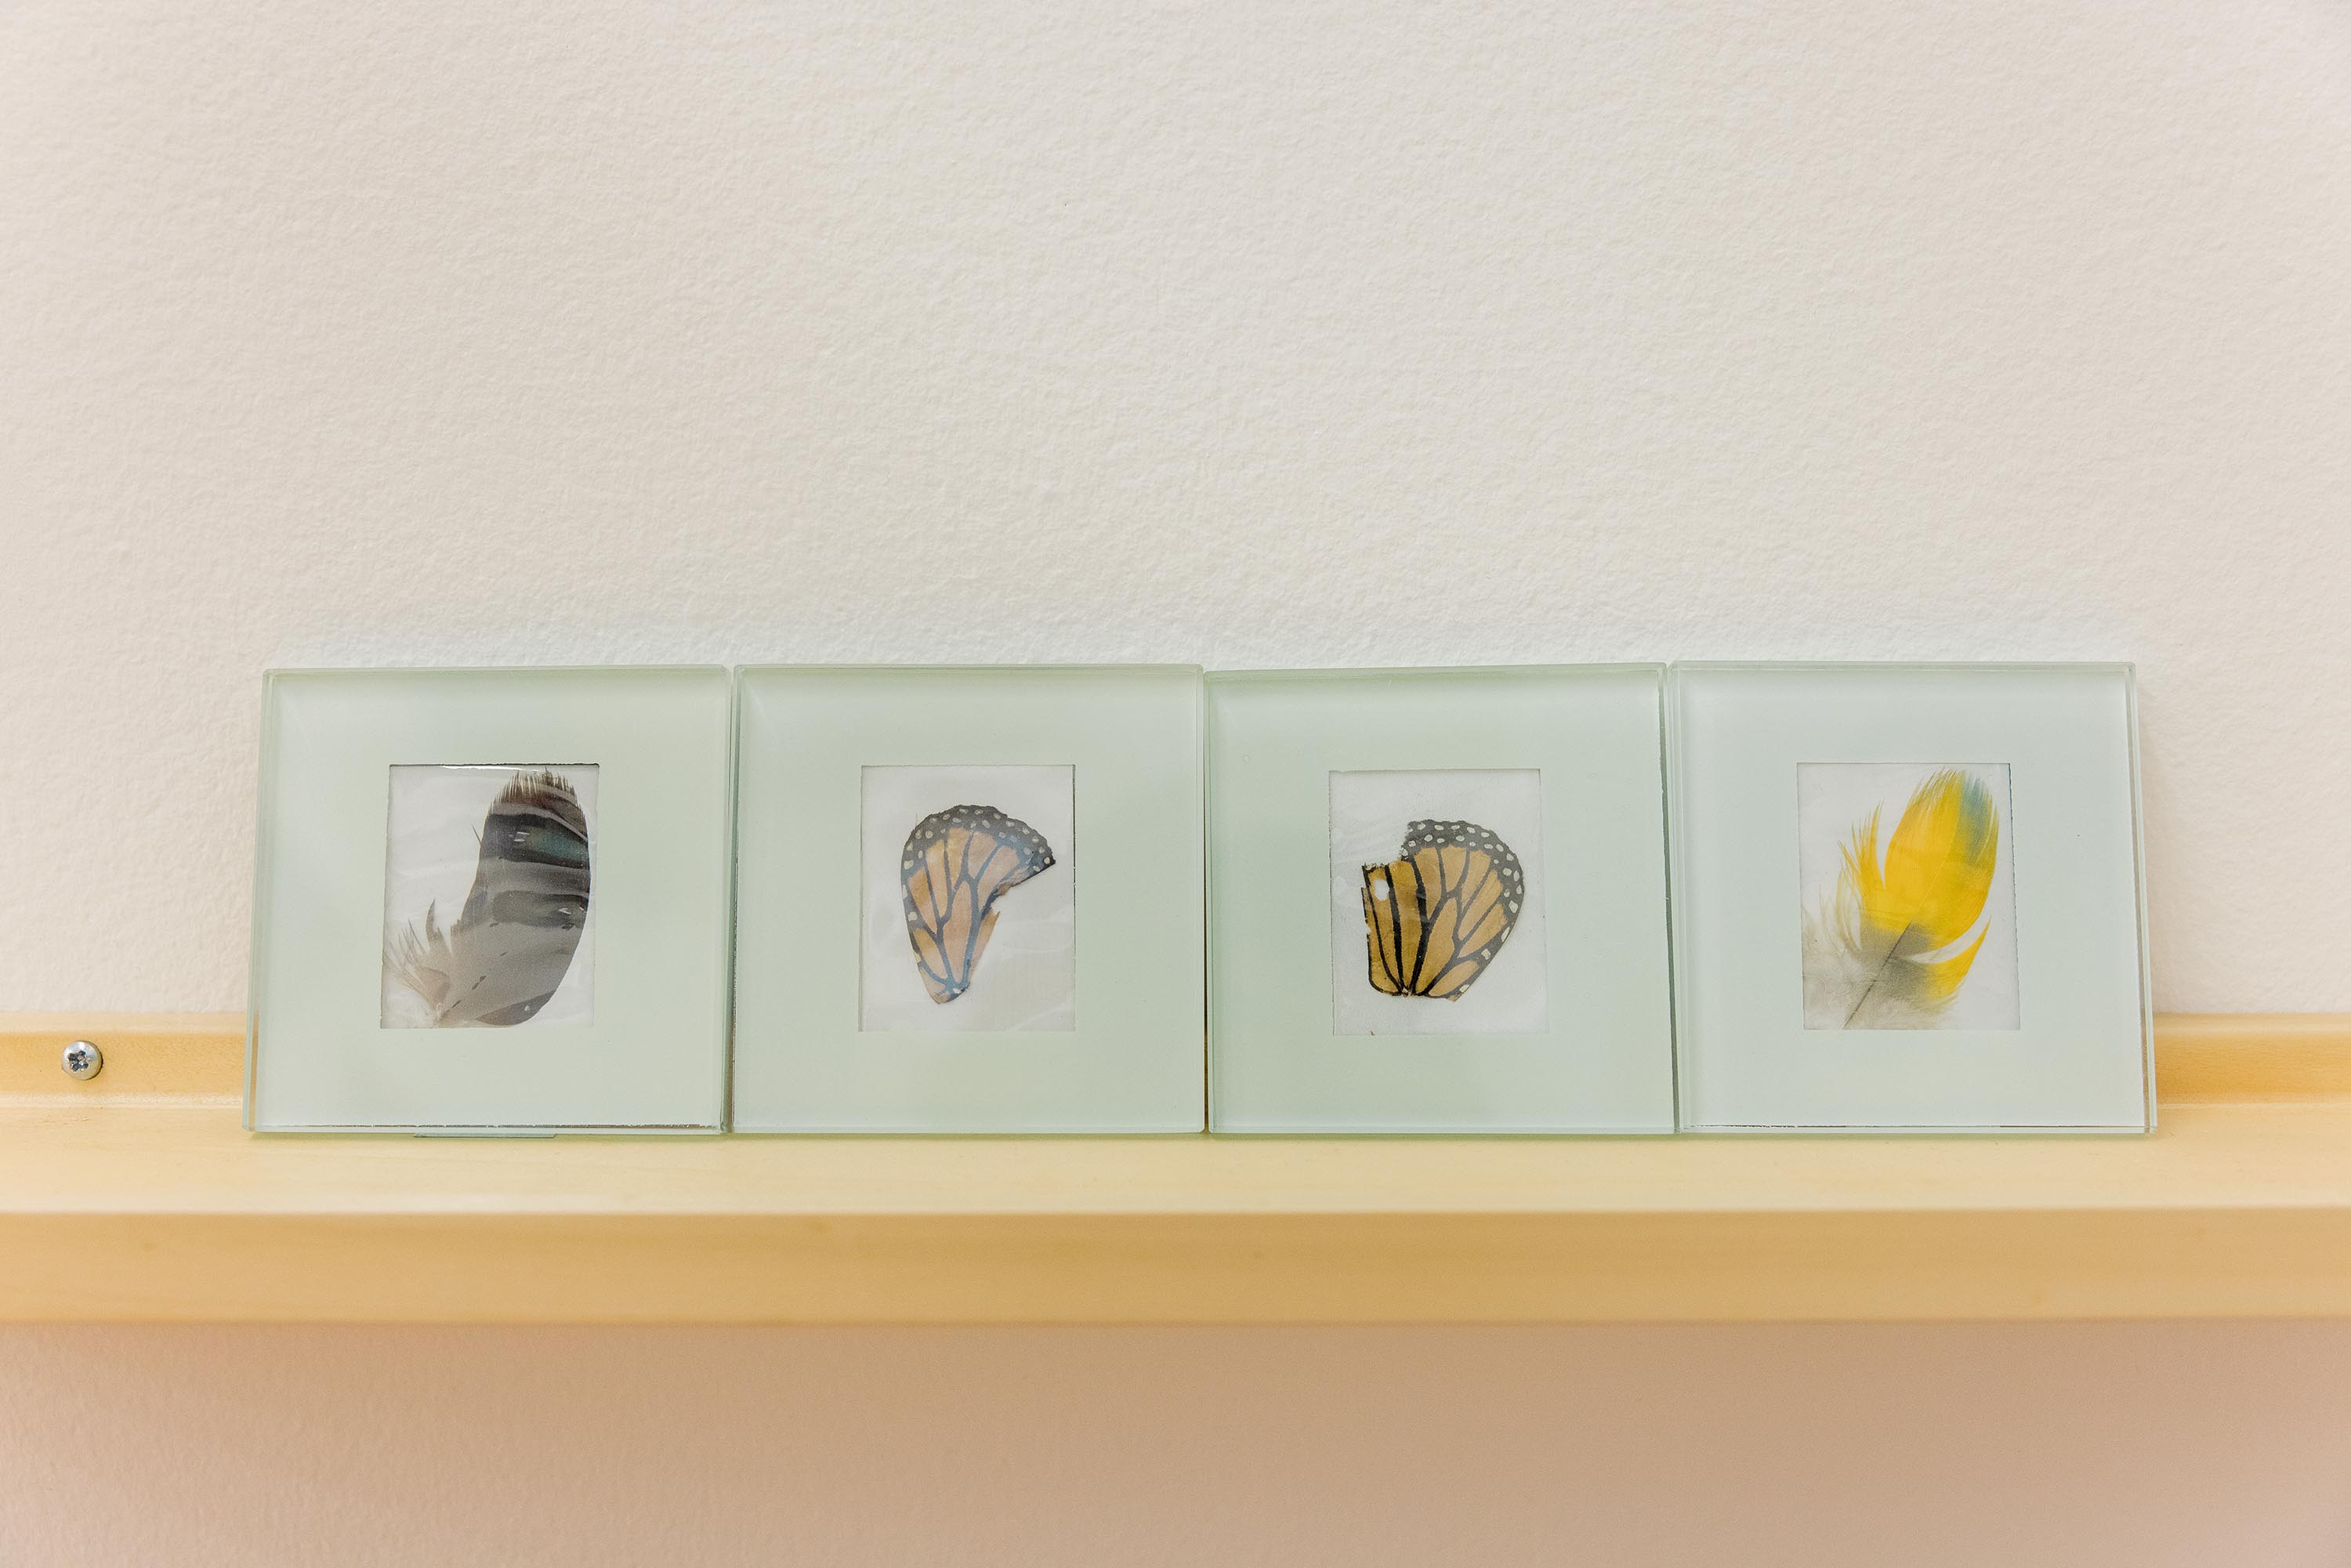 A shelf of individually-framed objects including feathers and pieces of monarch butterfly wings.